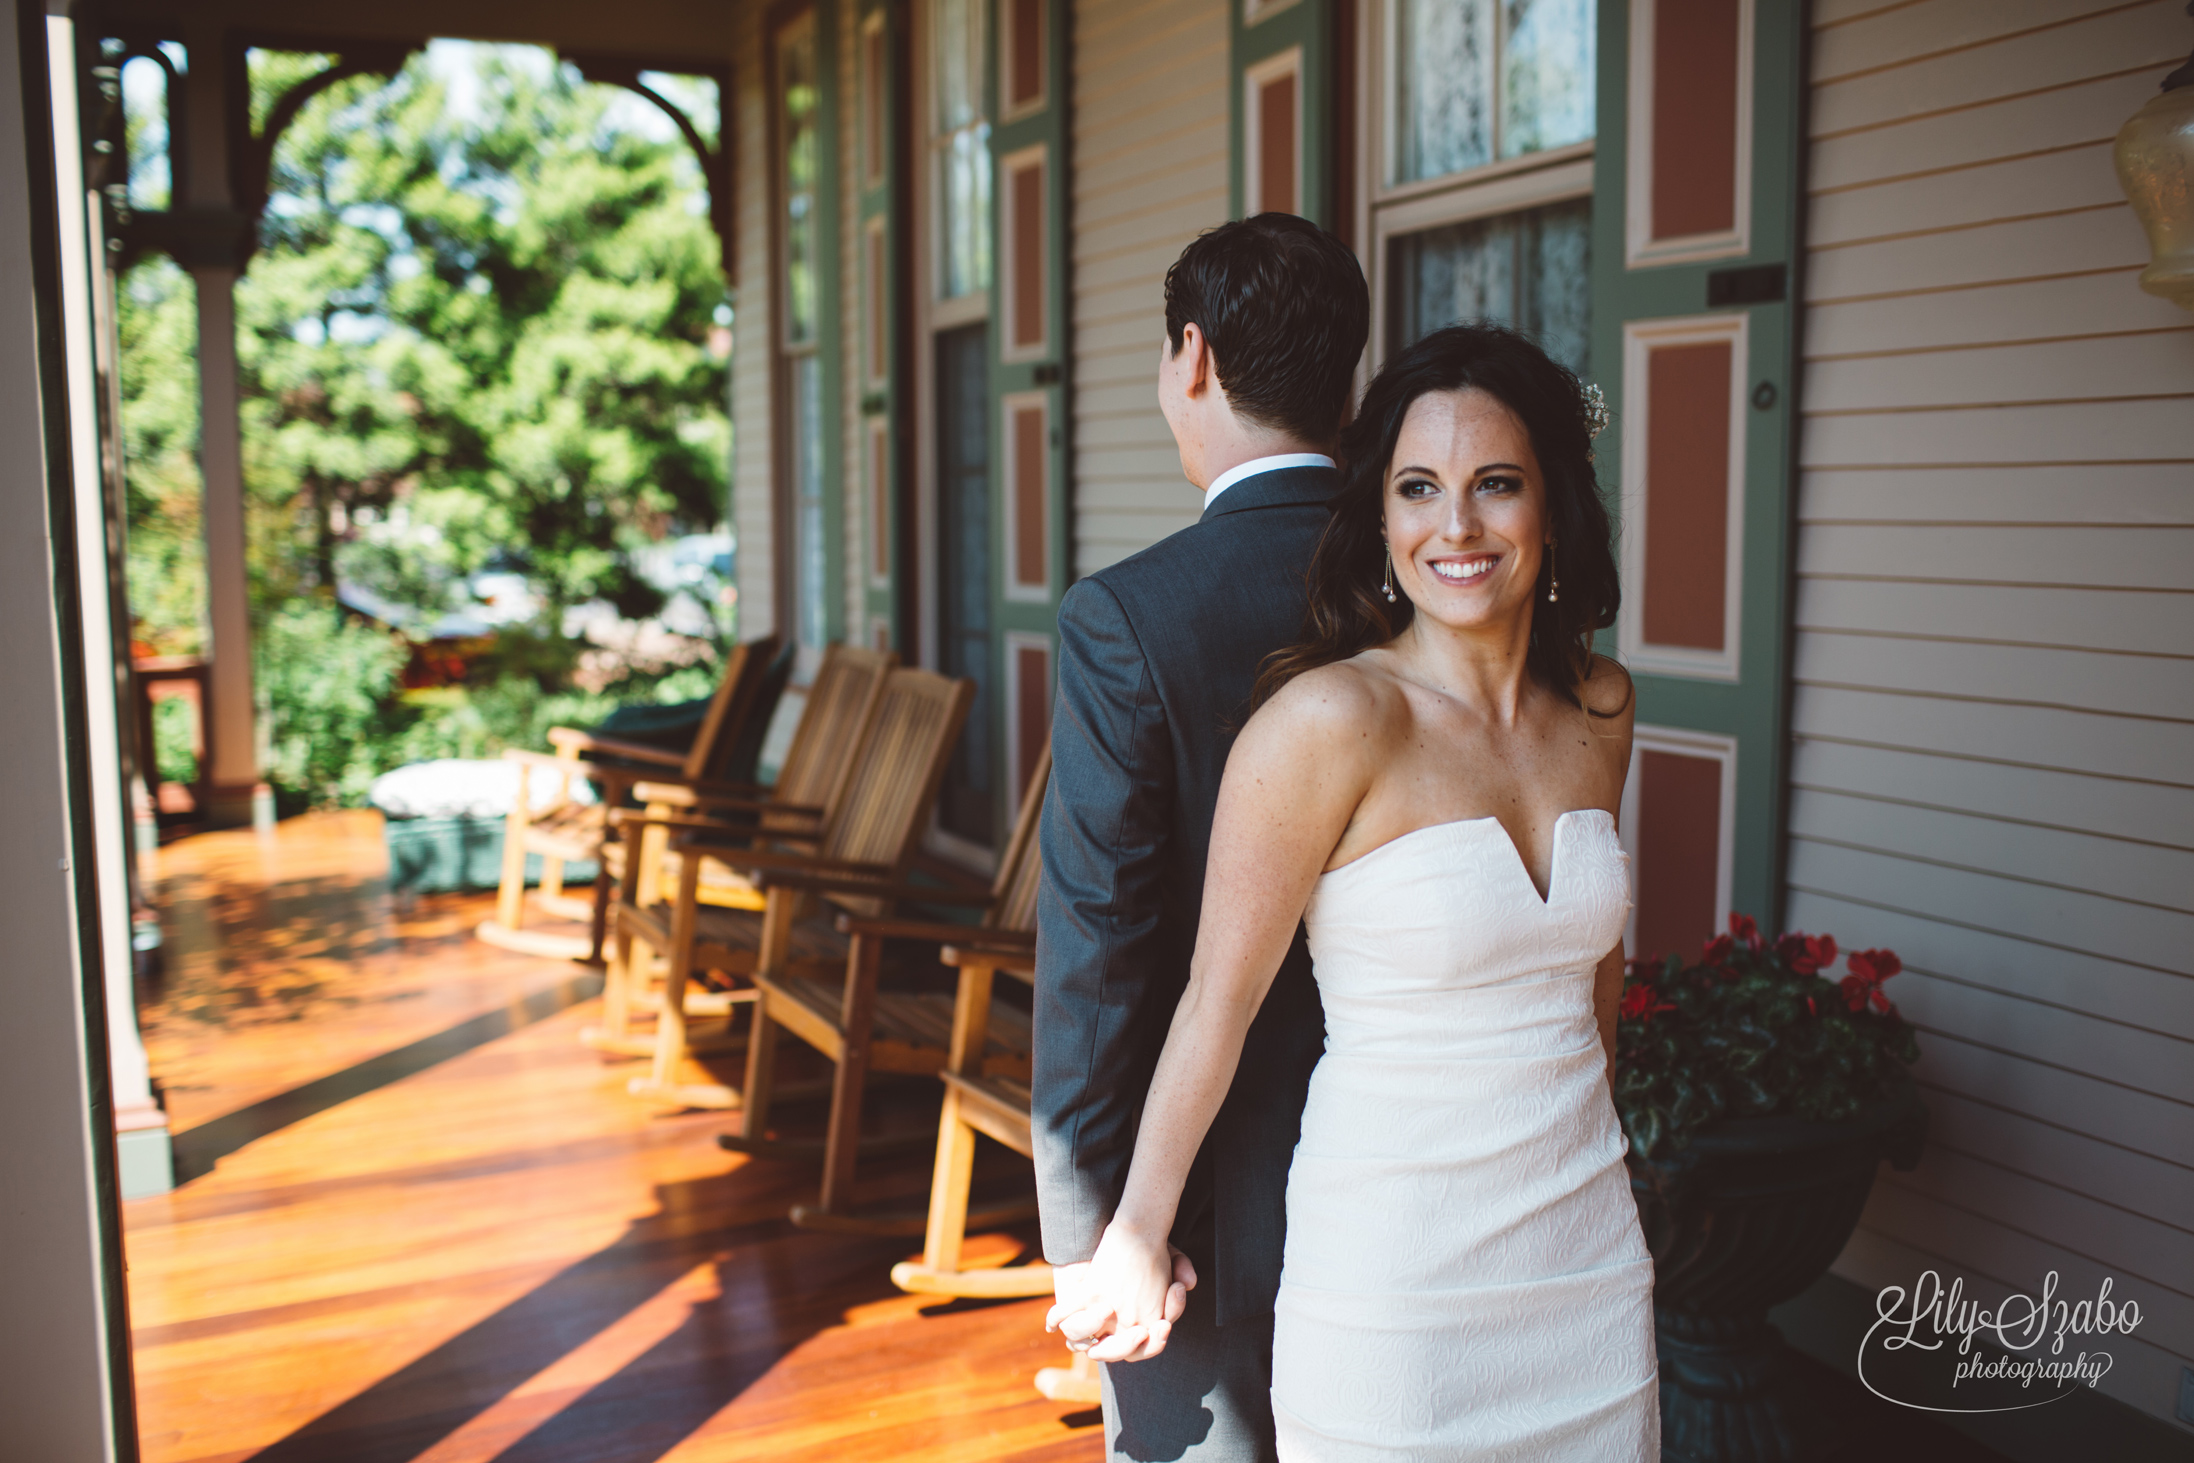 Southern Mansion Wedding in Cape May, NJ